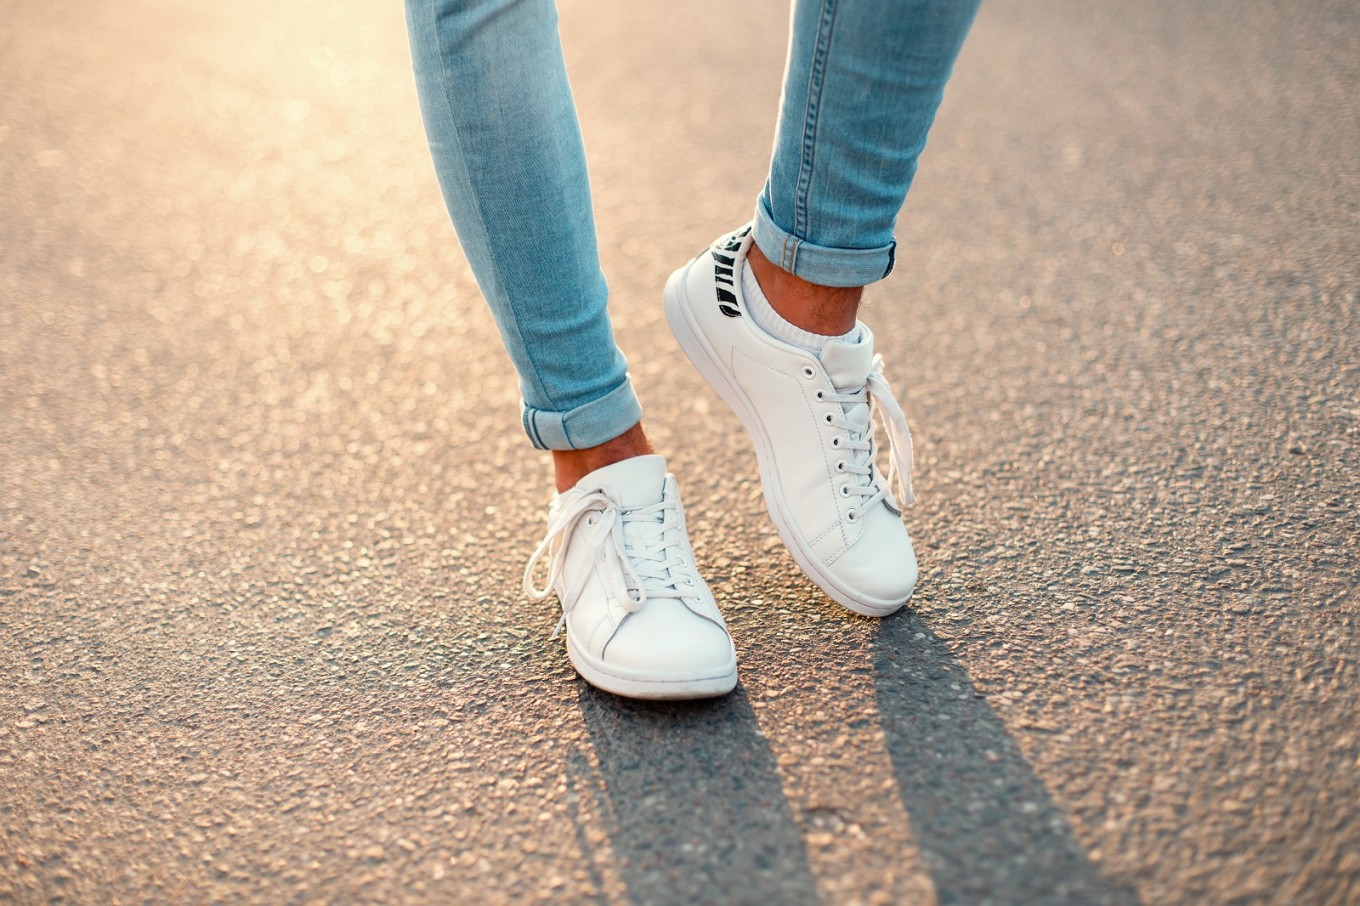 deadline næse subtropisk Cleaning and caring tips for white sneakers - Lifestyle - The Jakarta Post